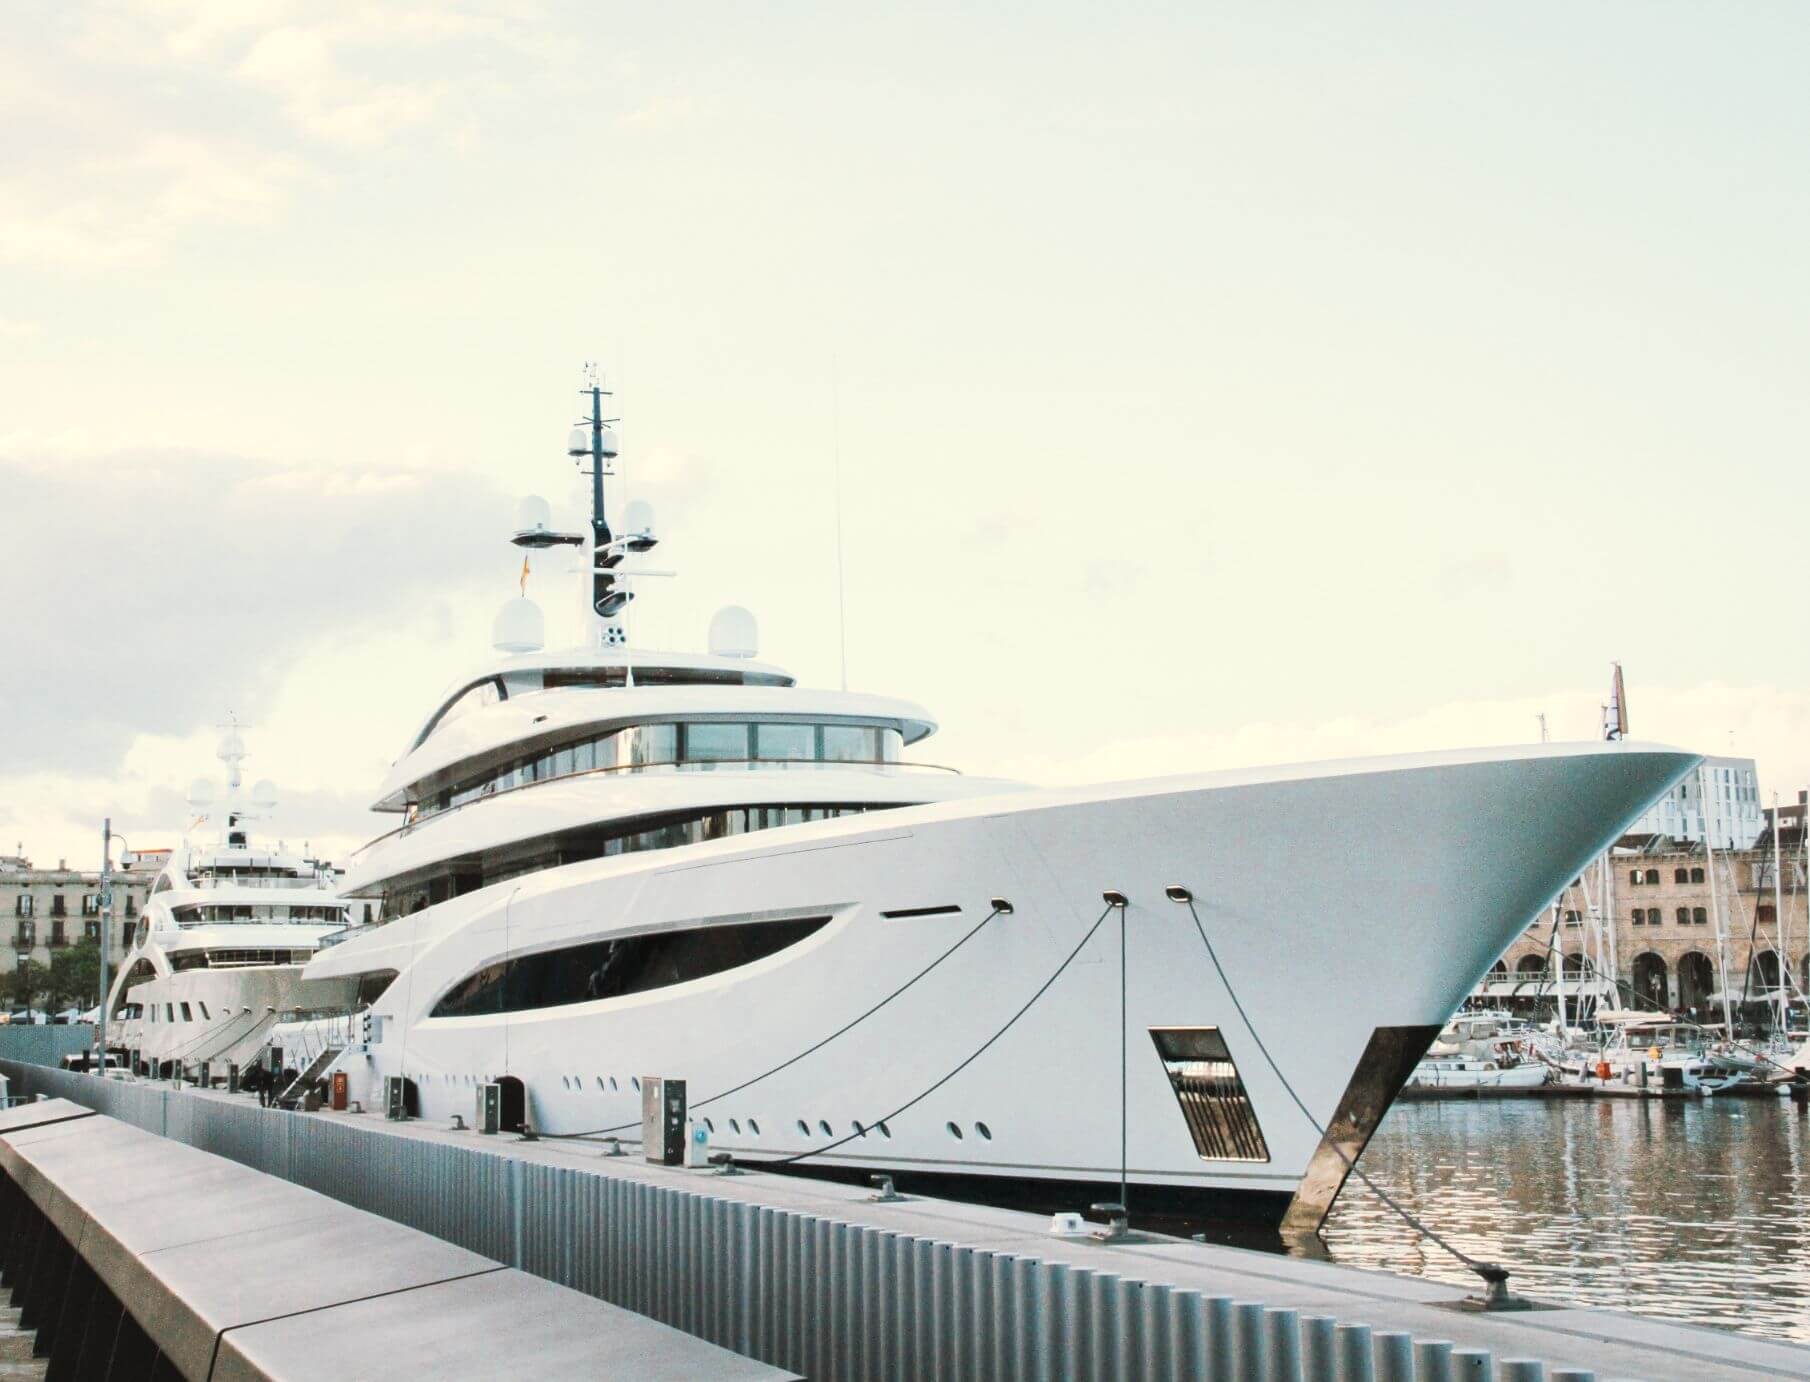 two large superyachts in a port